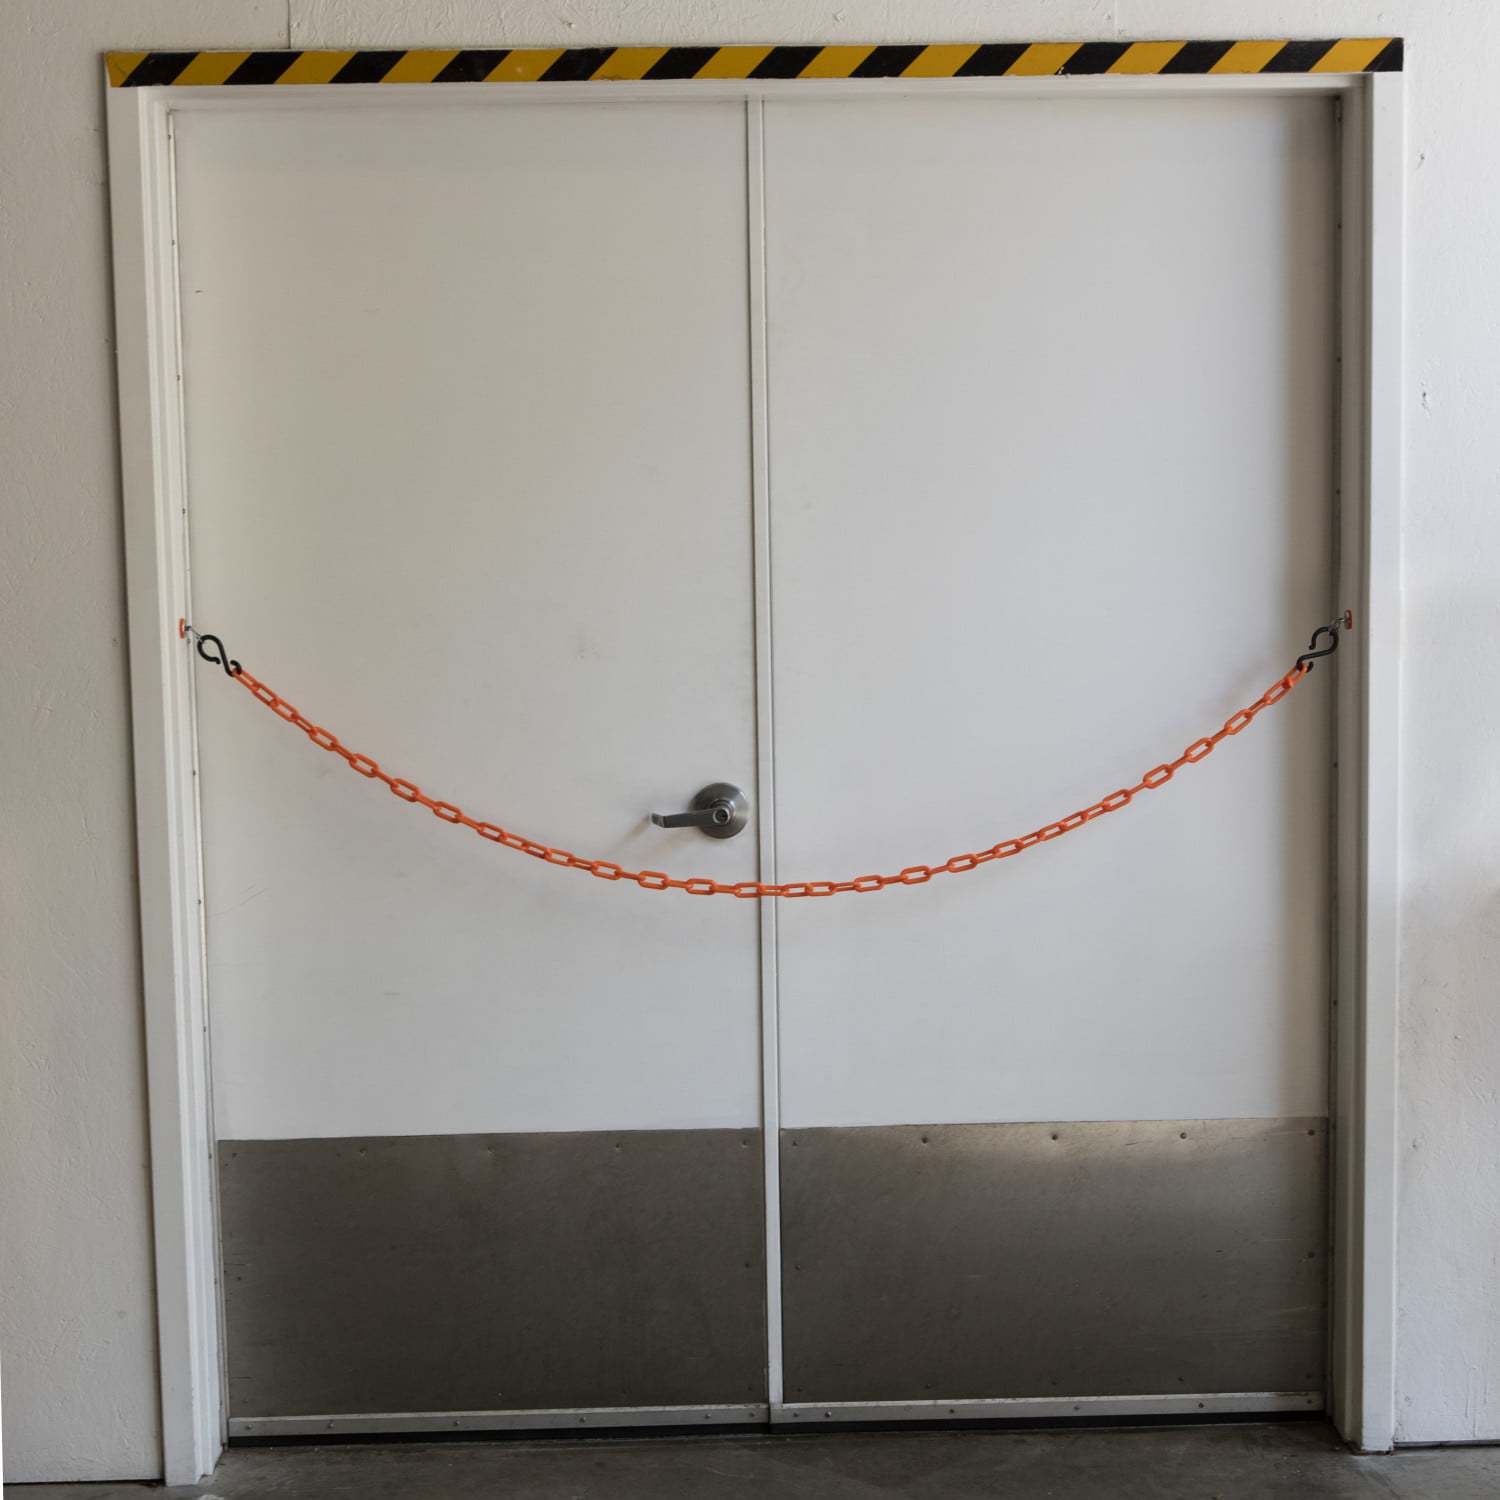 Loading Dock Kit with Magnet Carabiners & Chain